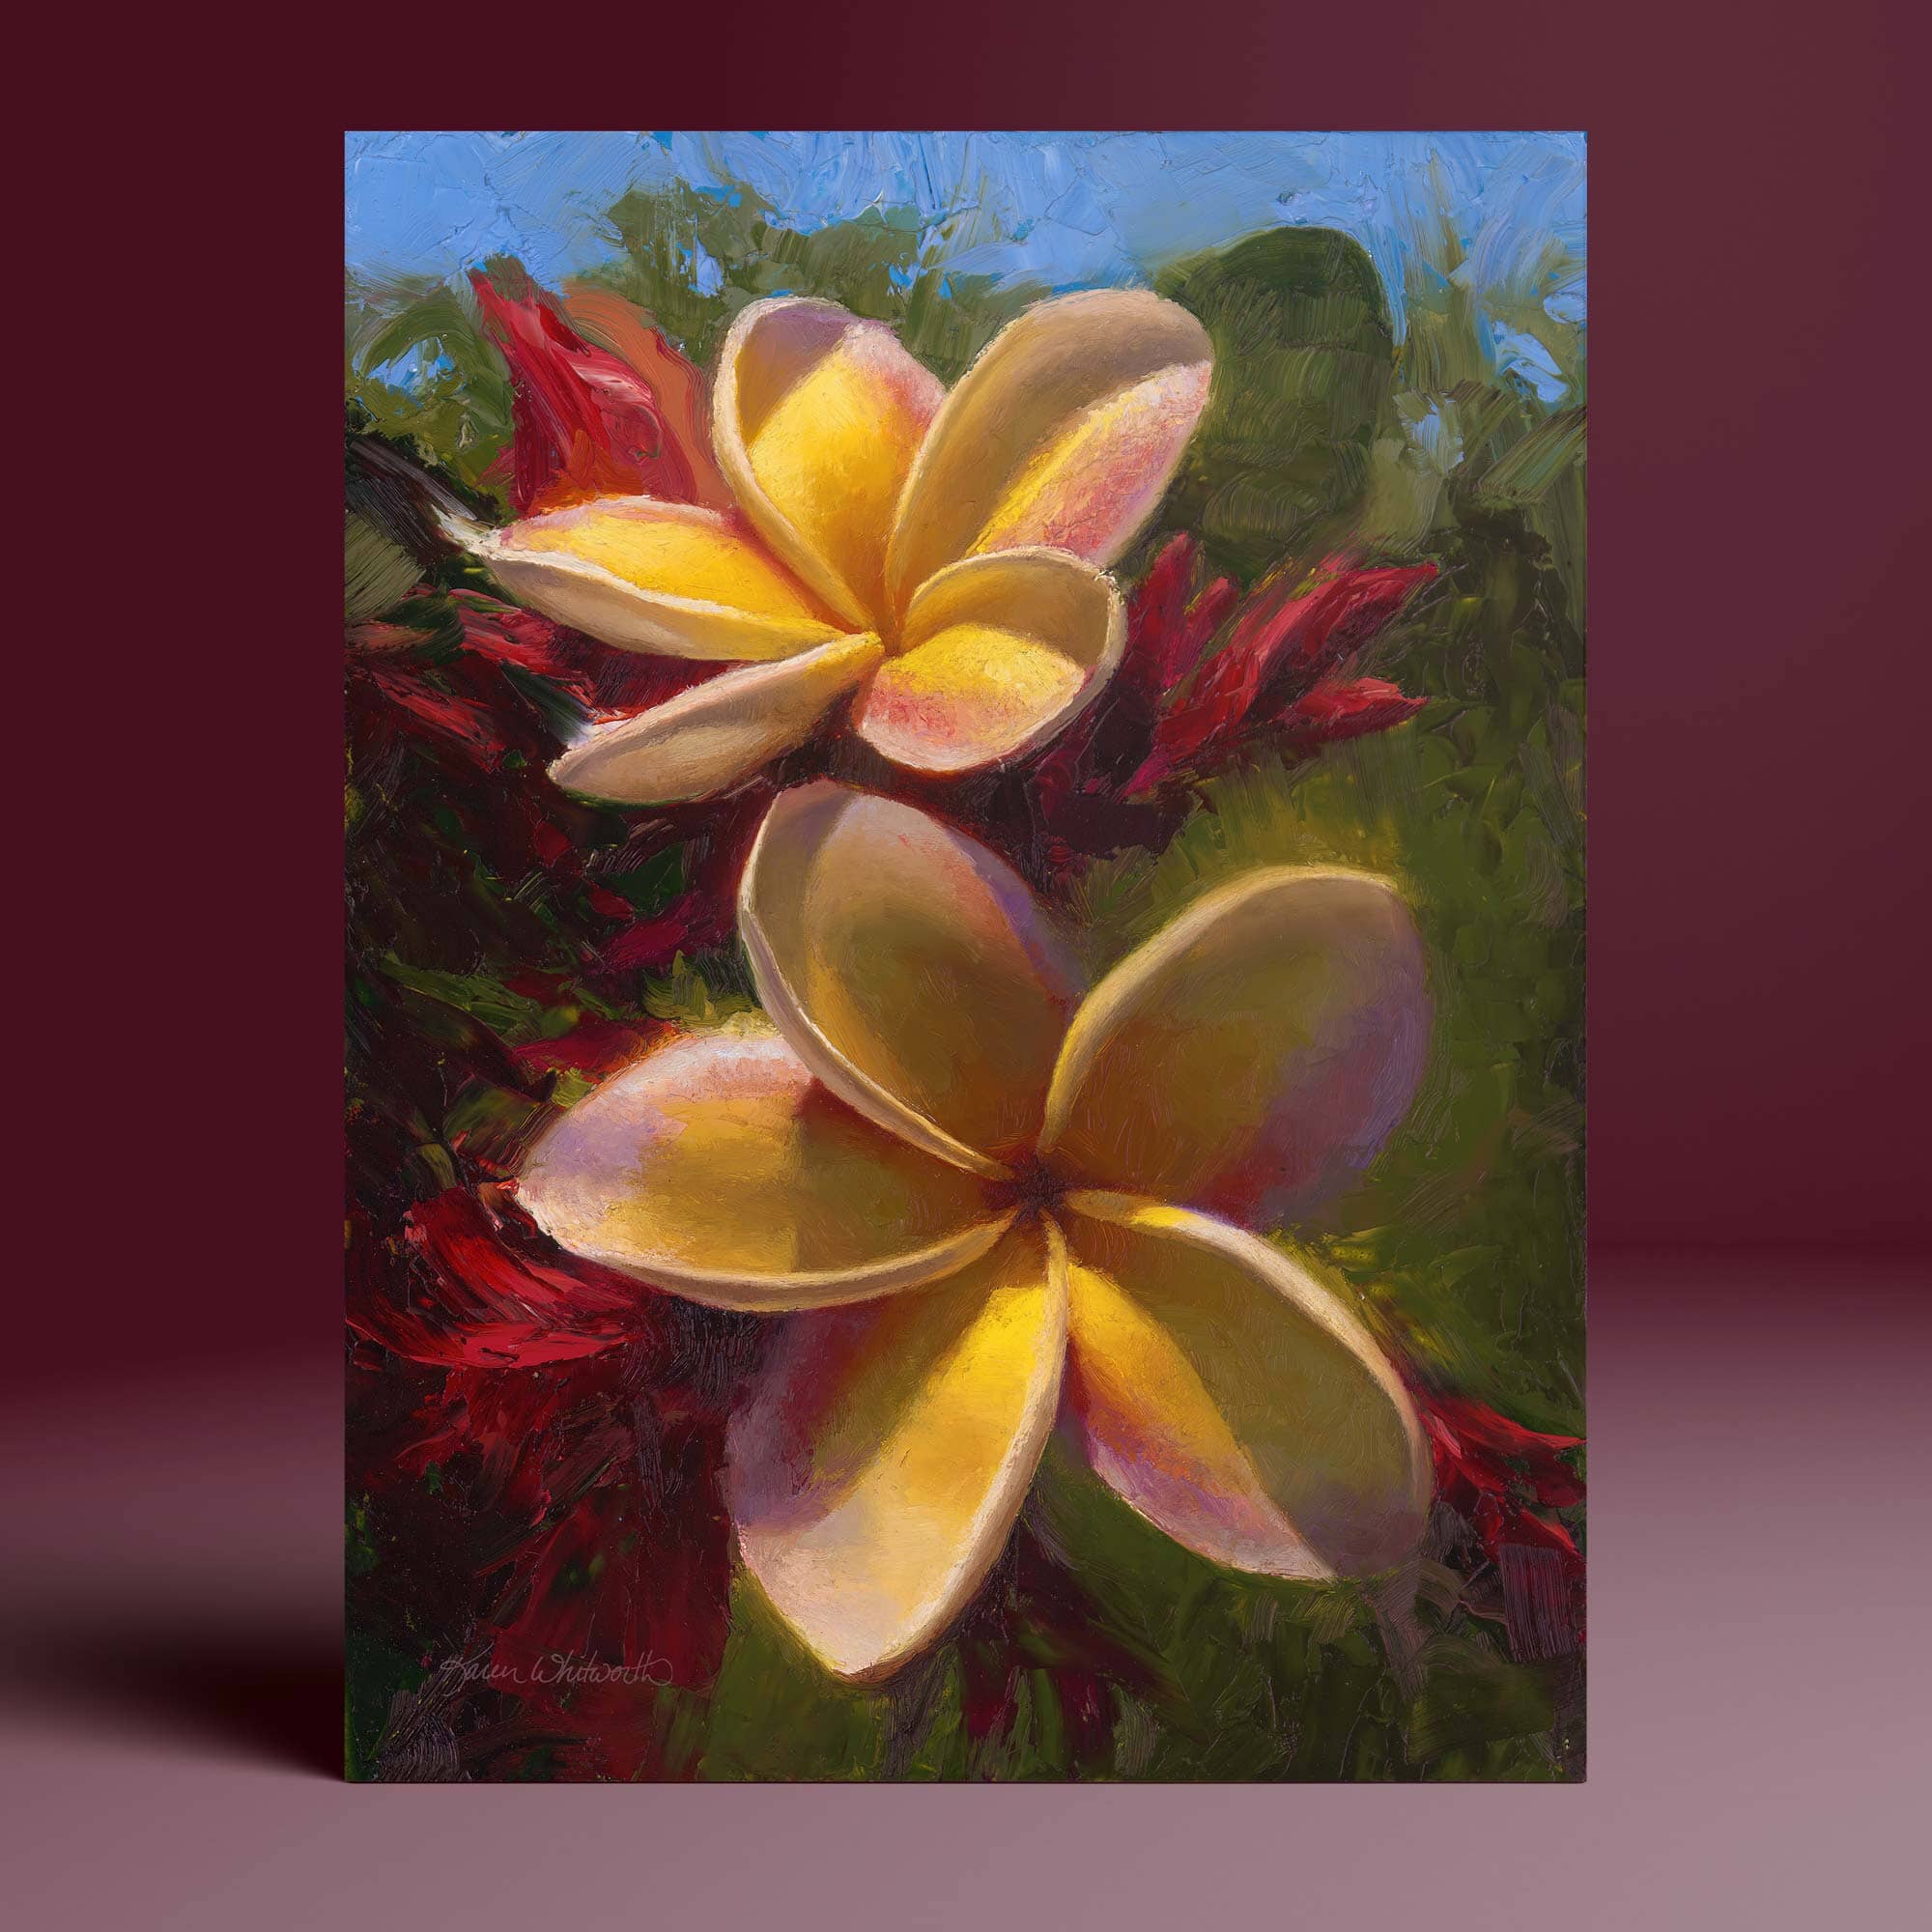 Colorful plumeria painting of 2 yellow flowers against a green background. This tropical flower wall art print was painted by artist Karen Whitworth.